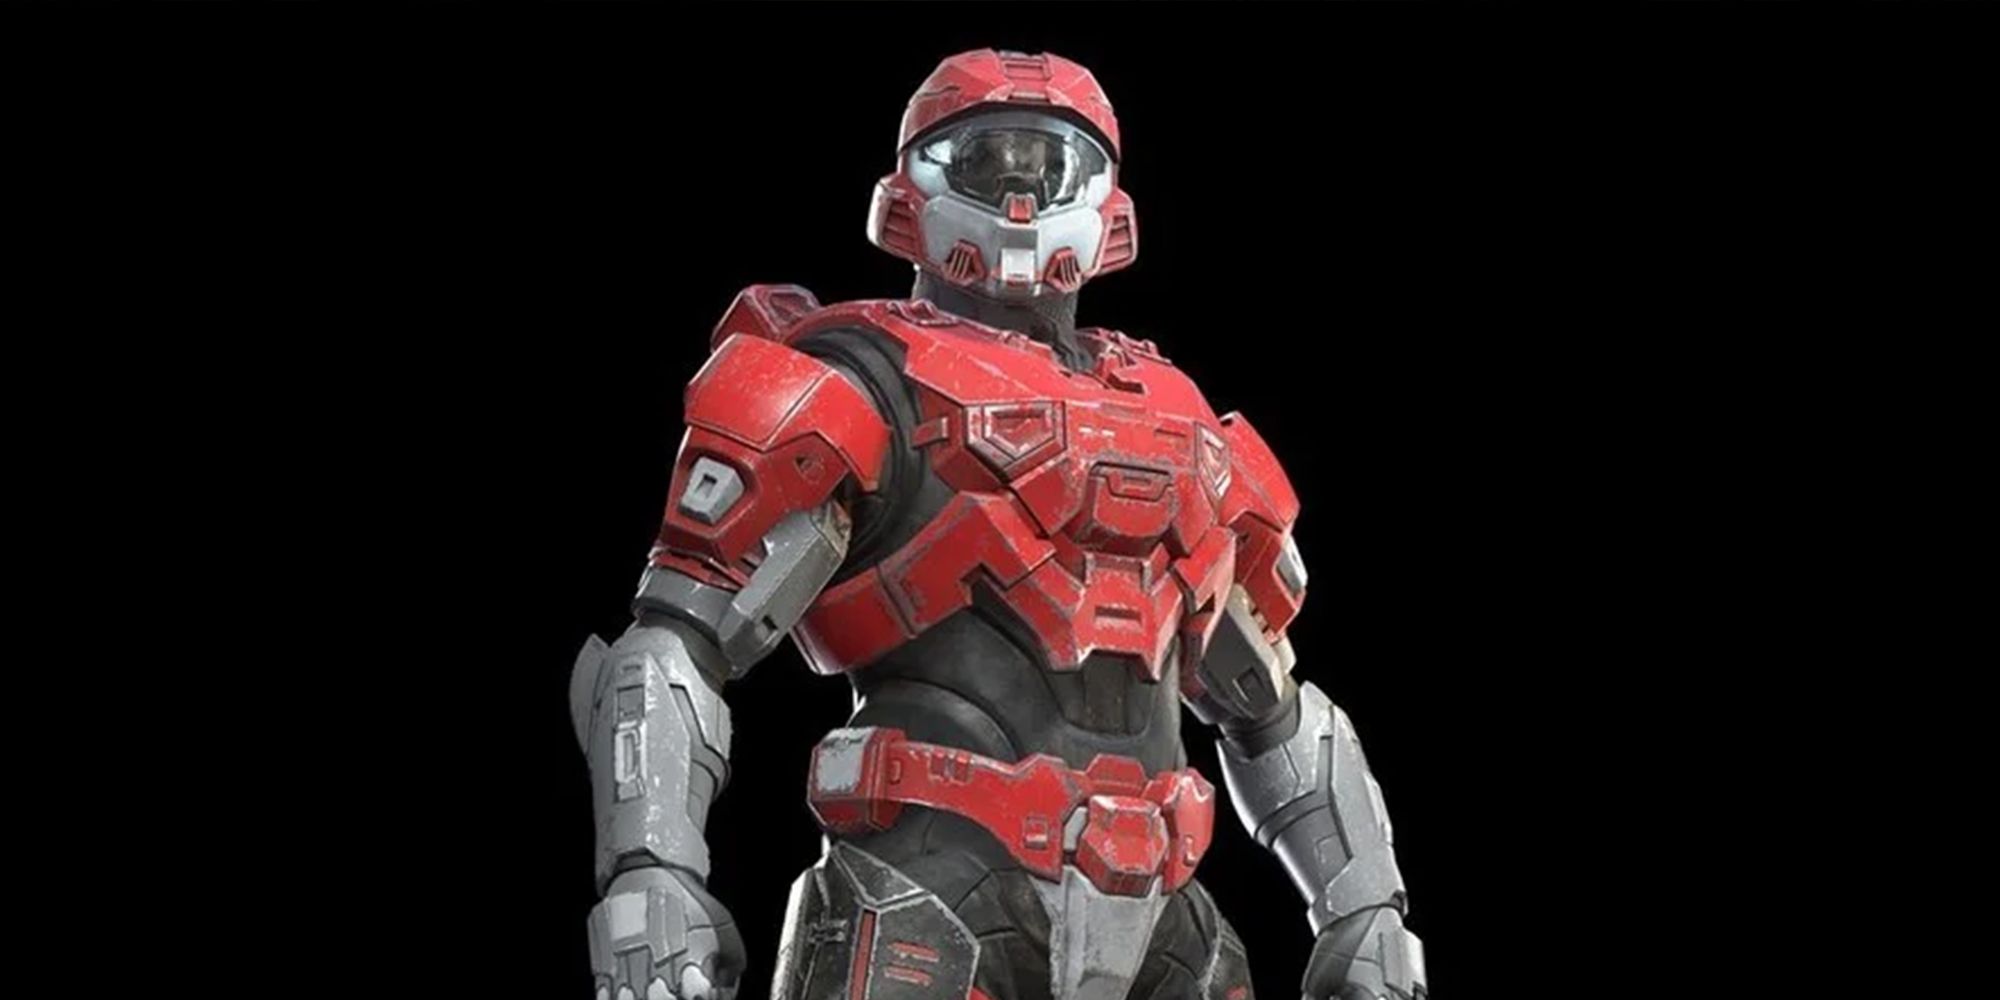 The armor variants from Halo 5 should return as universal patterns in  Infinite. : r/halo